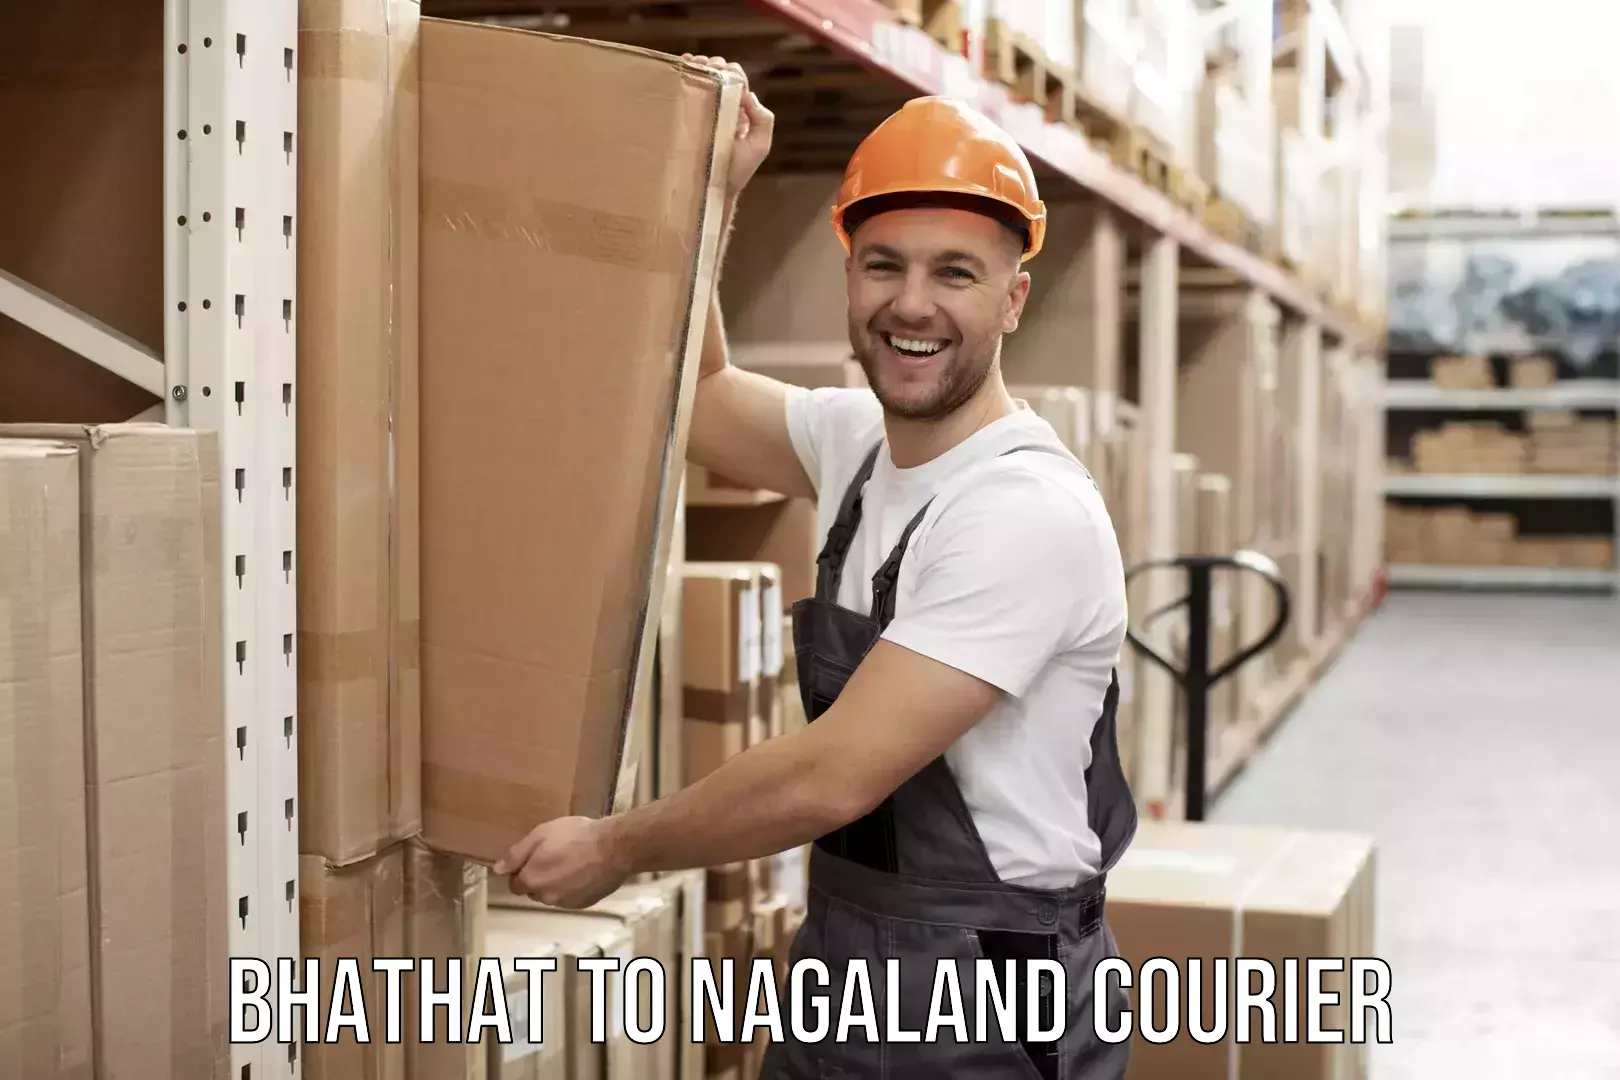 Quality relocation services Bhathat to Nagaland